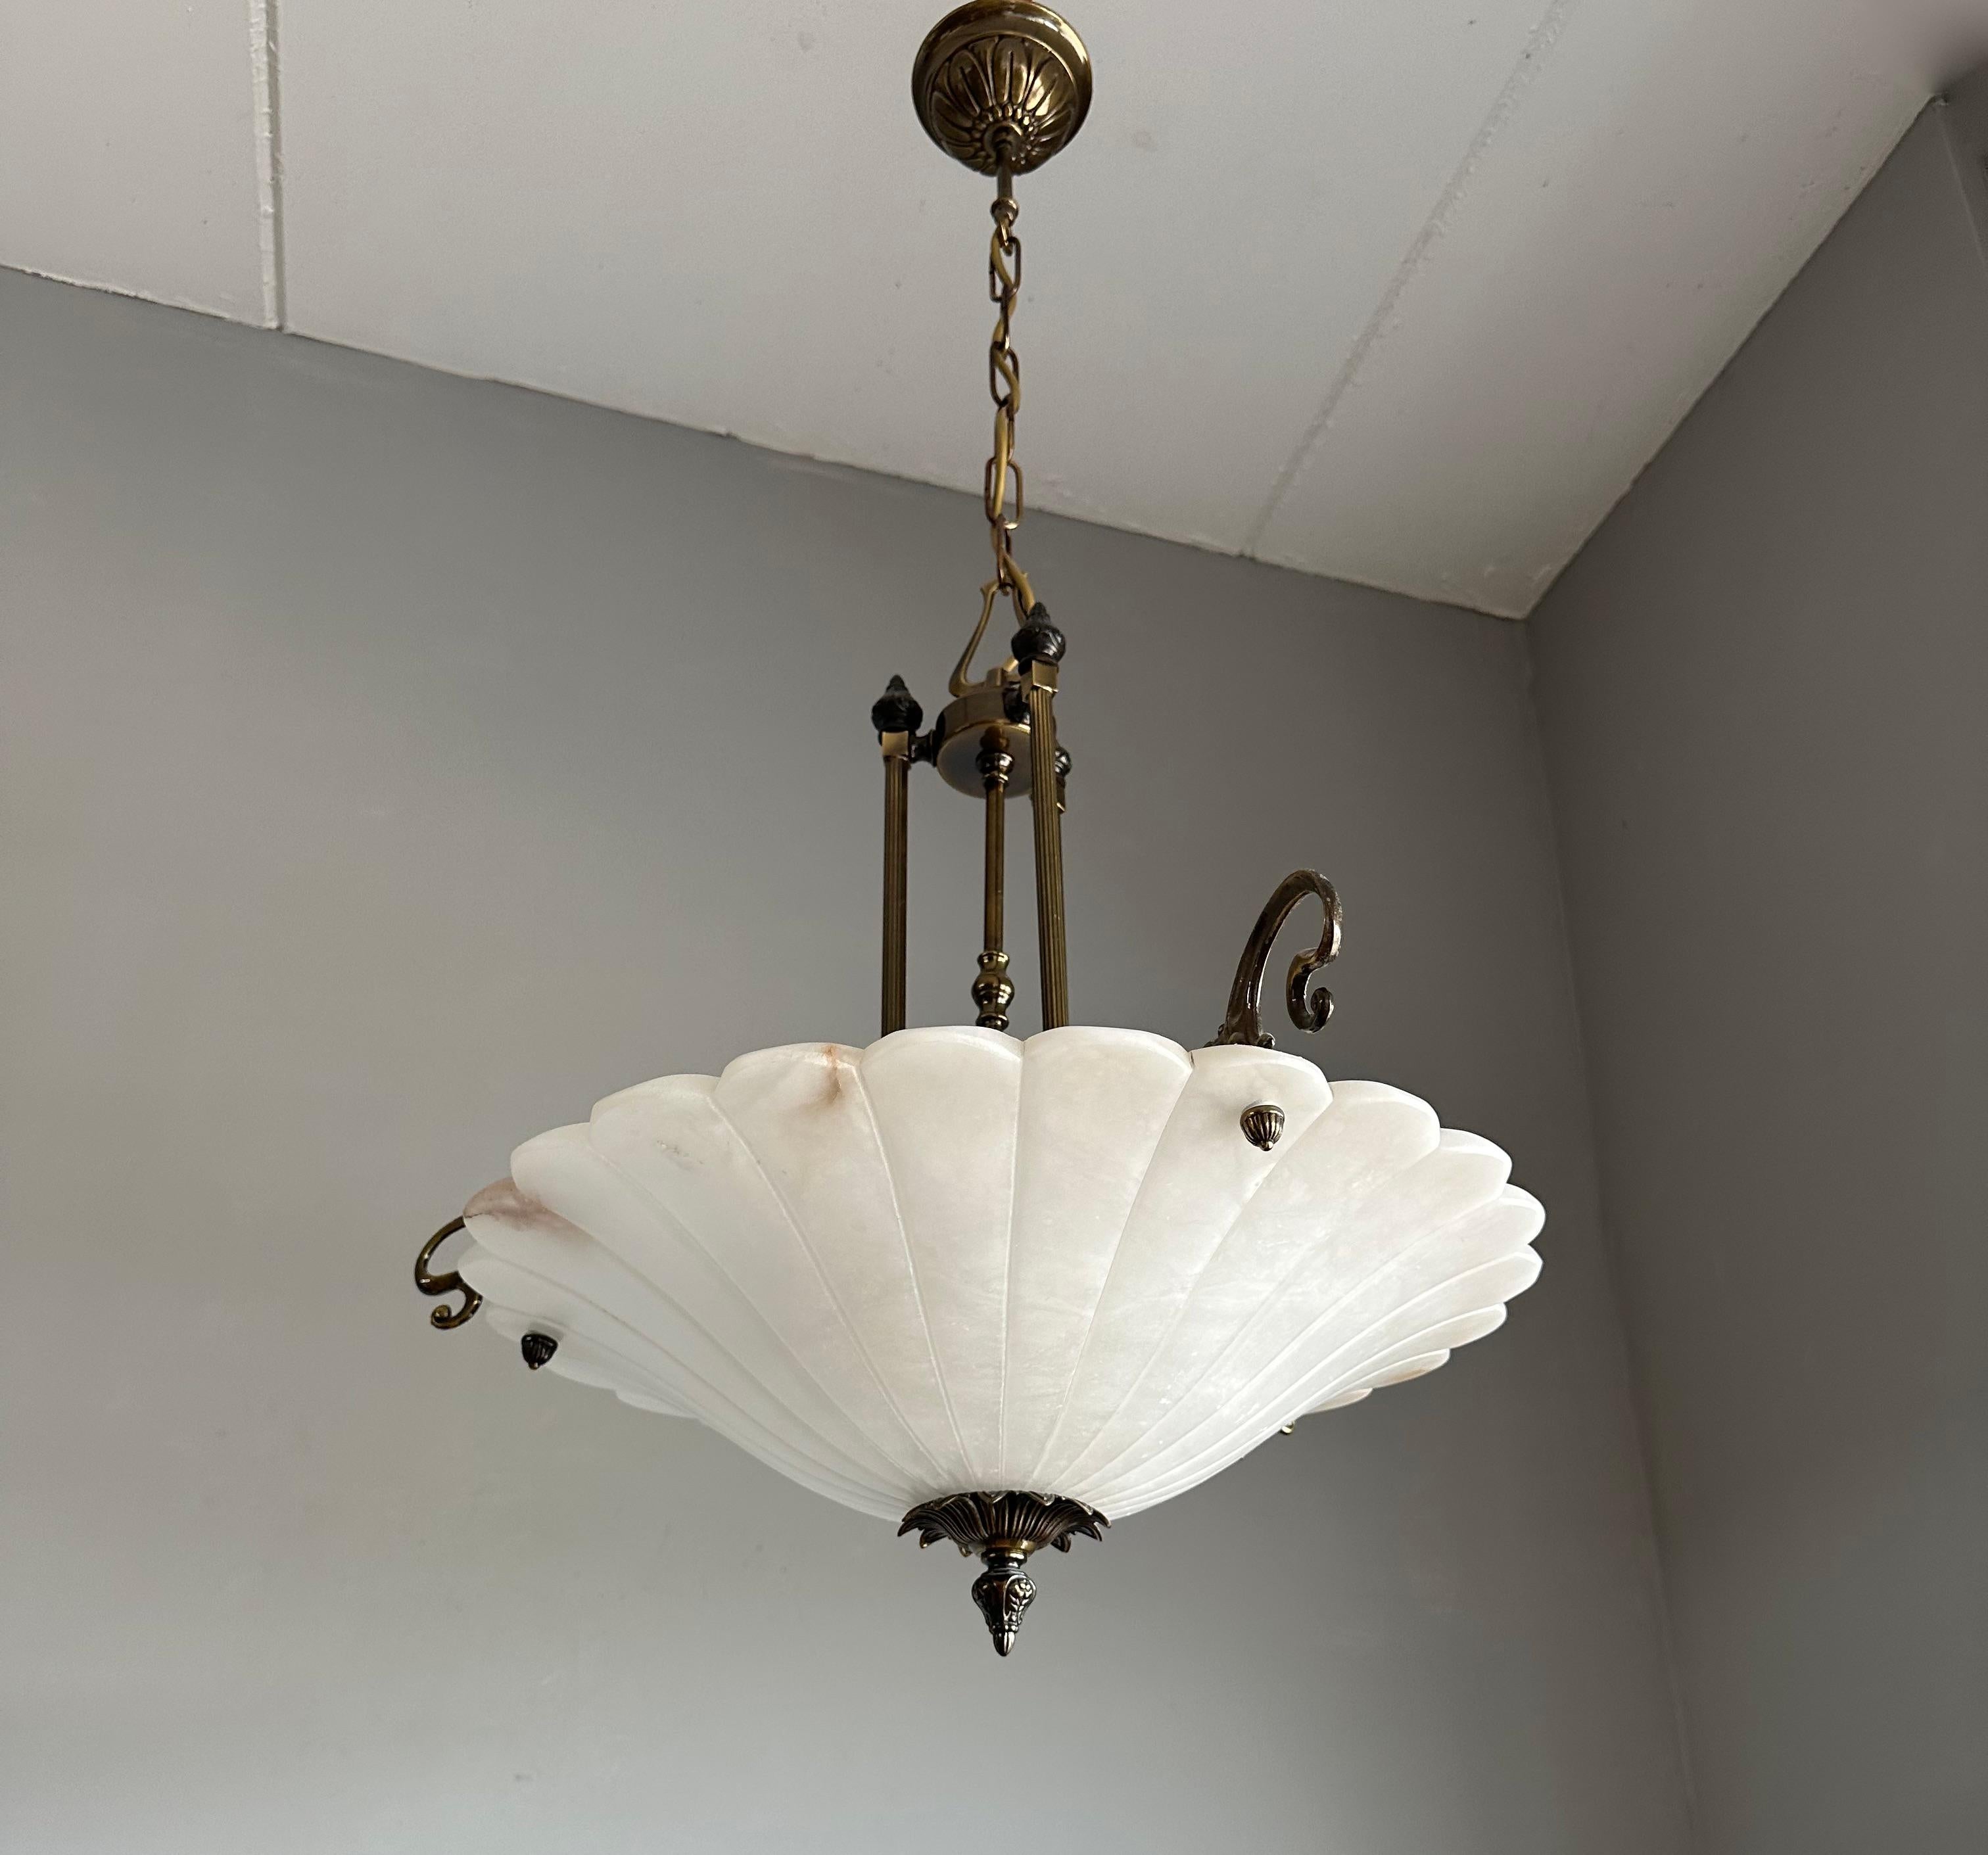 Excellent condition and rare design, 3-light chandelier.

If you appreciate the elegant designs from the Art Nouveau era, then this midcentury made, 1970s alabaster, bronze and brass chandelier could be perfect for you. The combination of the white